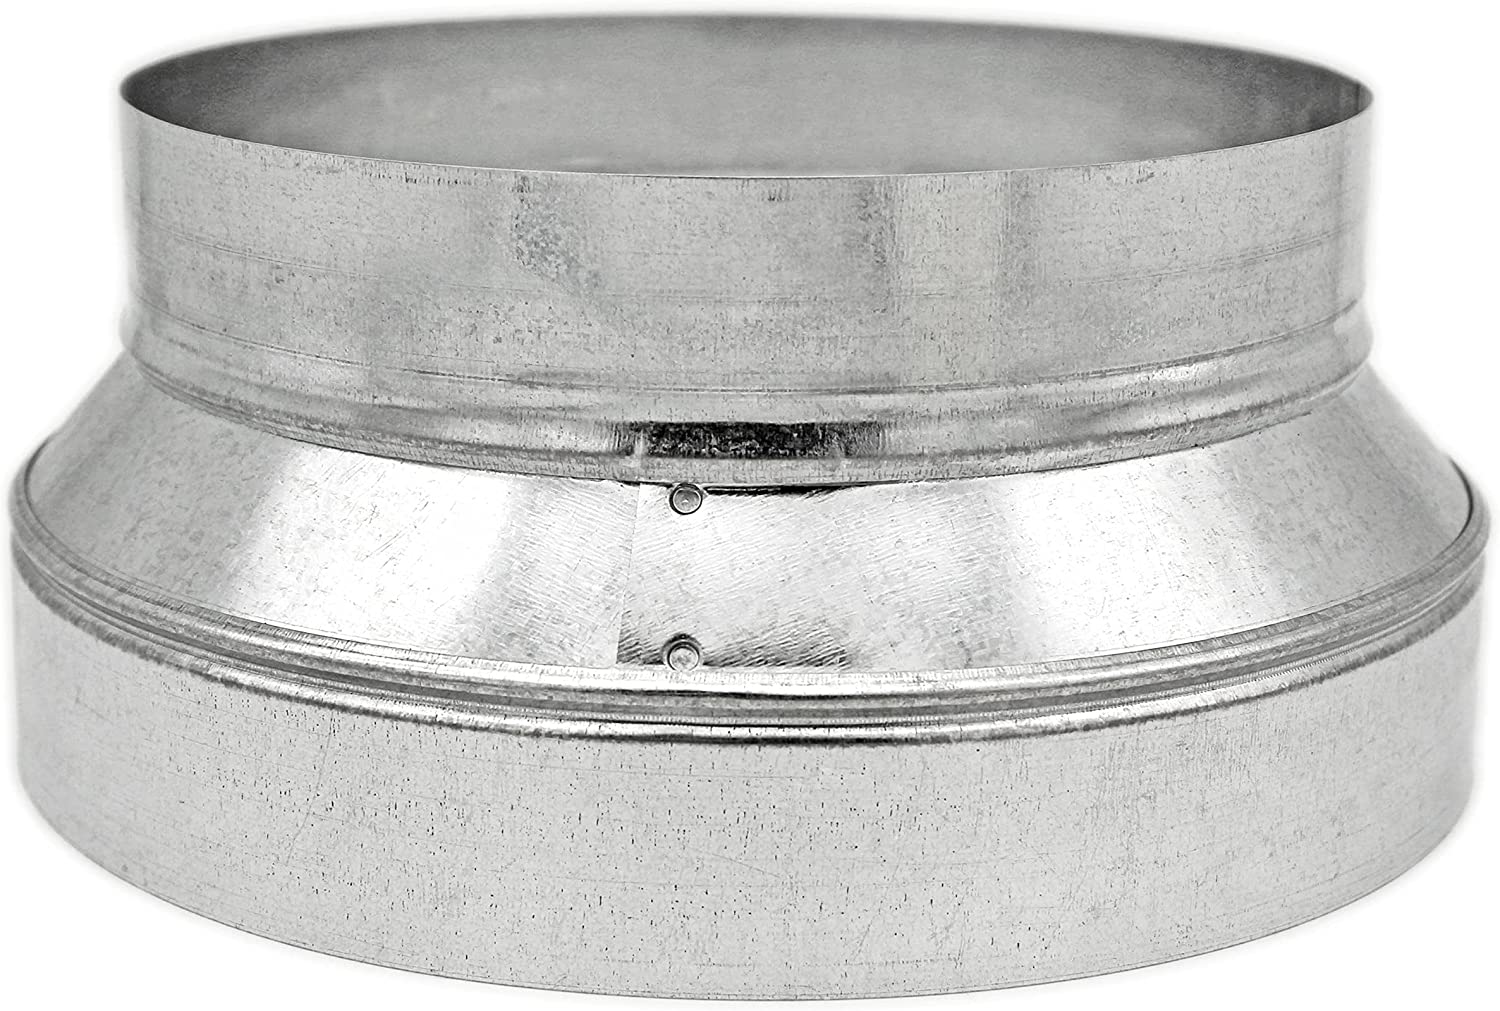 HVAC Premium Round Metal Pipe Reducer & Increaser | 8" to 6" HVAC Duct Reducer or Increaser 30g Gauge | Galvanized Sheet Metal Ducting Connector is Compatible with Duct 6"